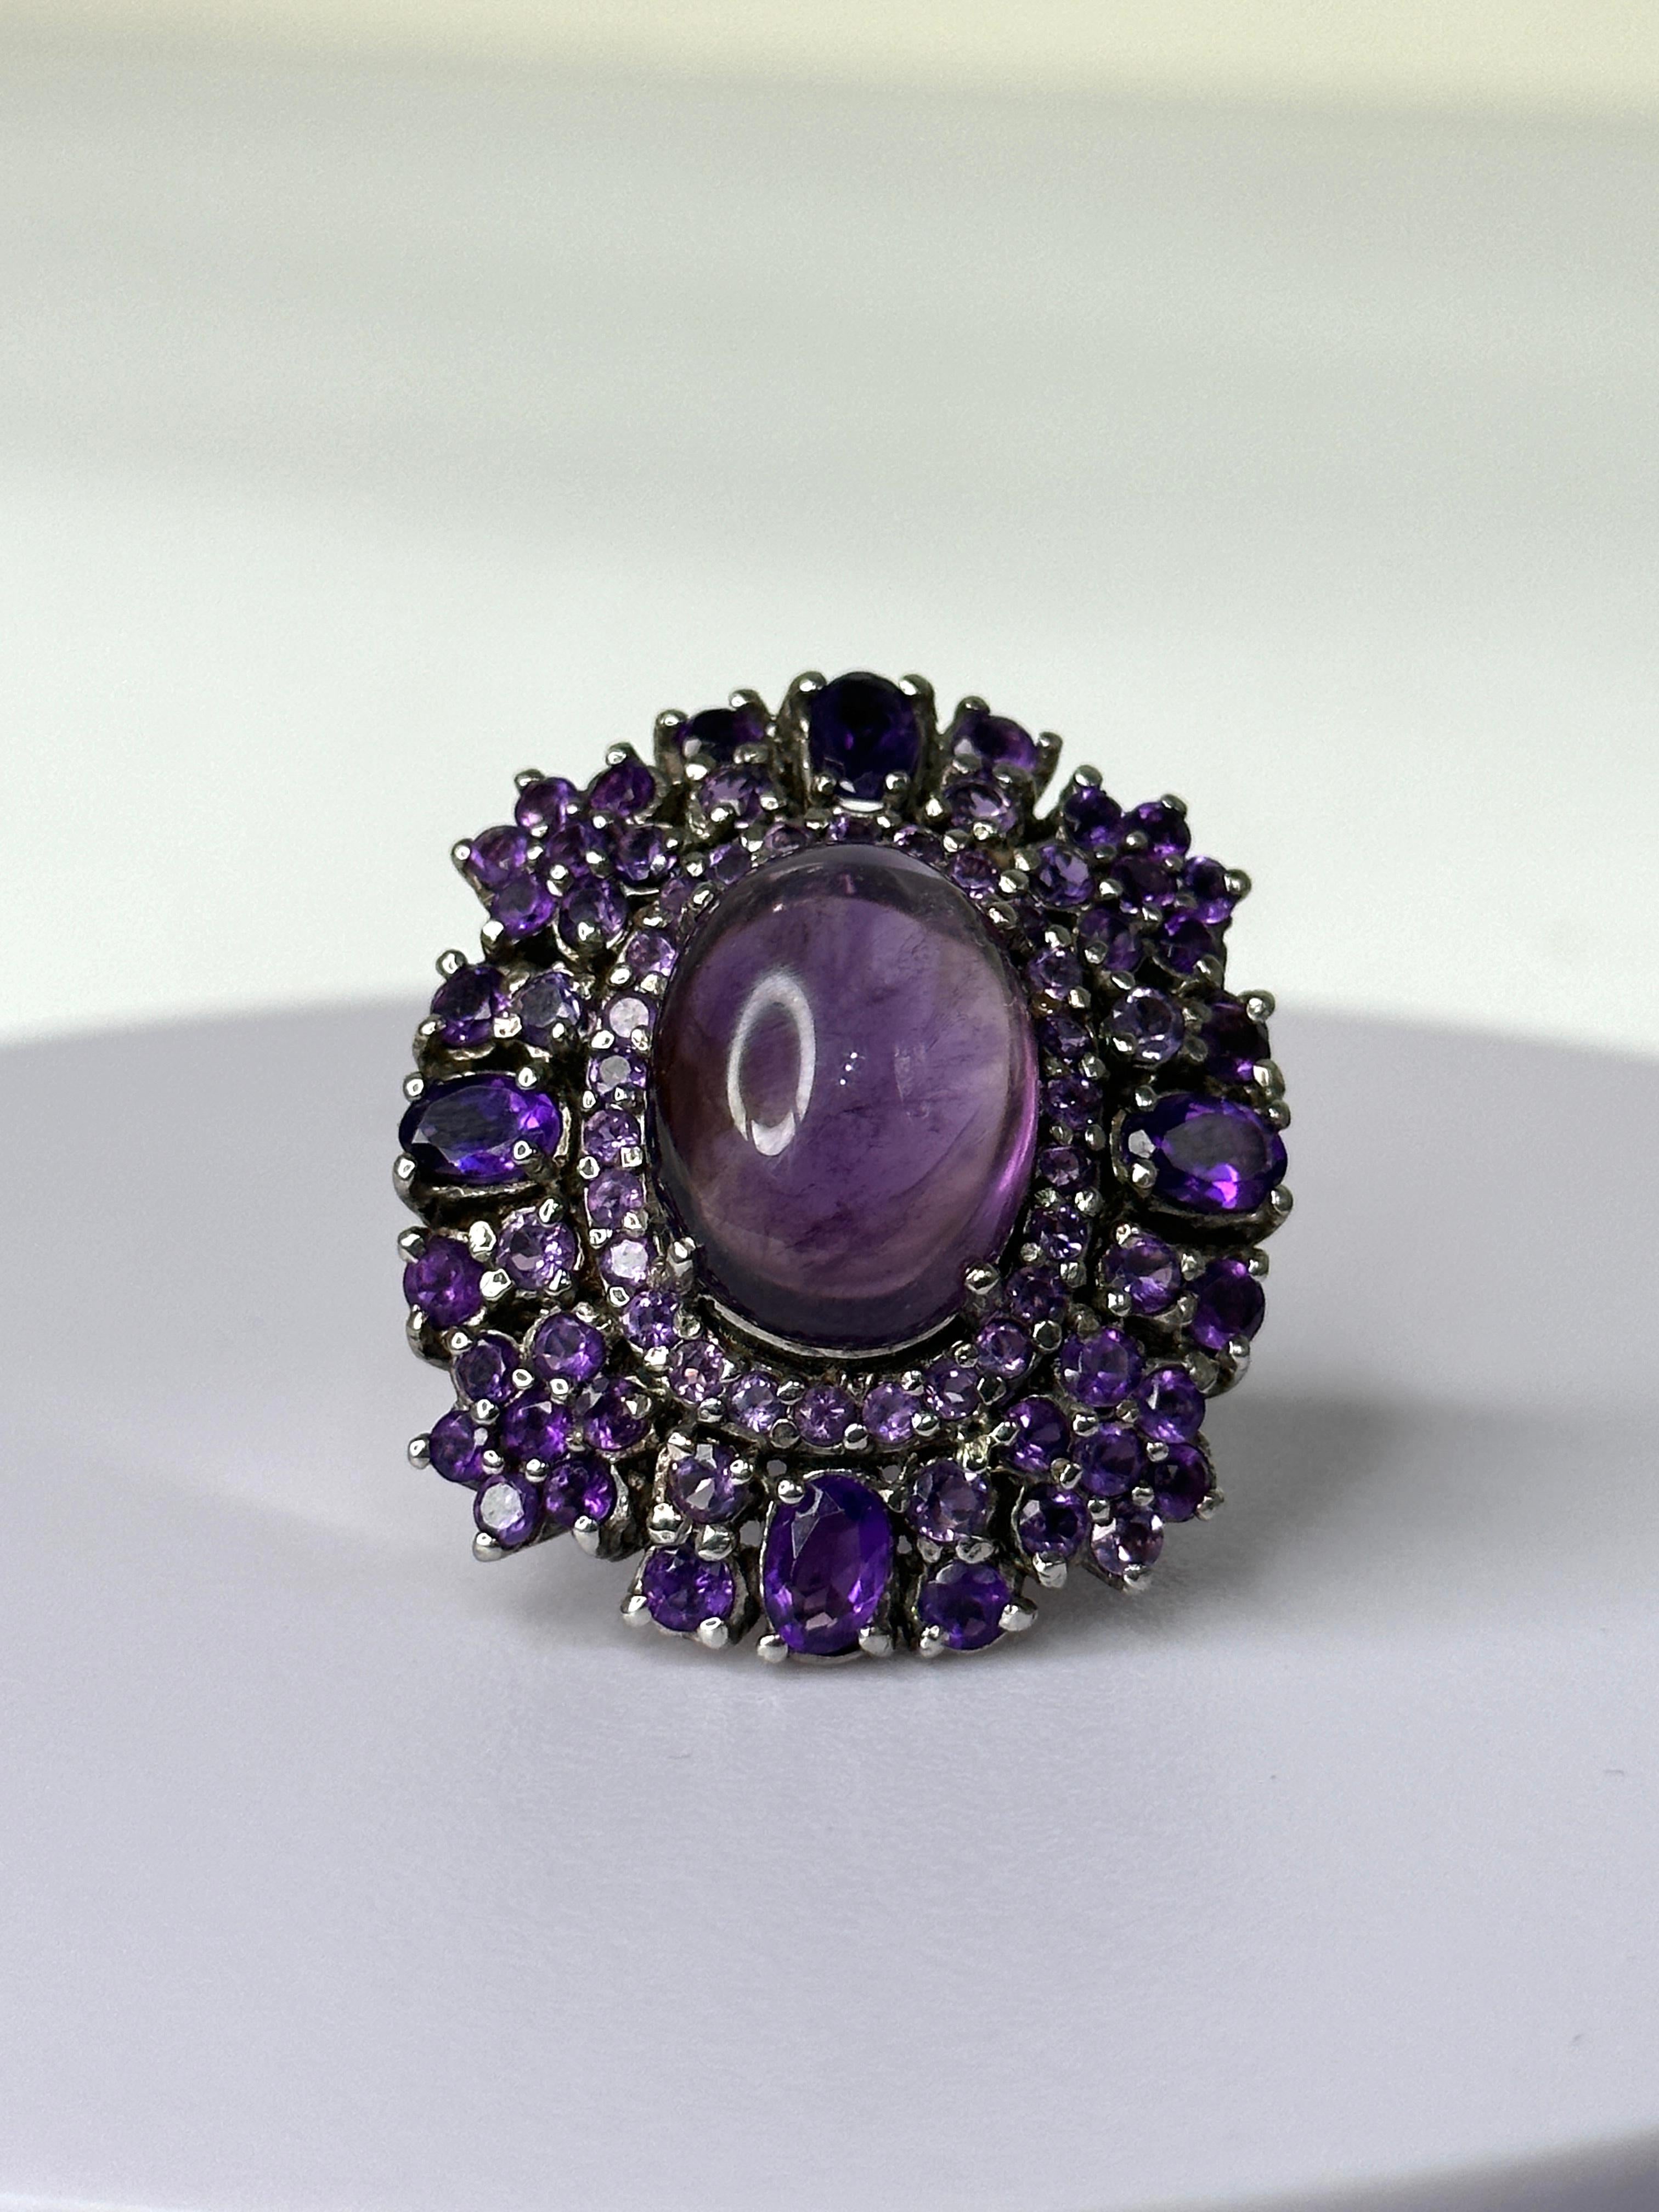 Cabochon Massive Amethyst Cocktail Ring 925 Sterling Silver